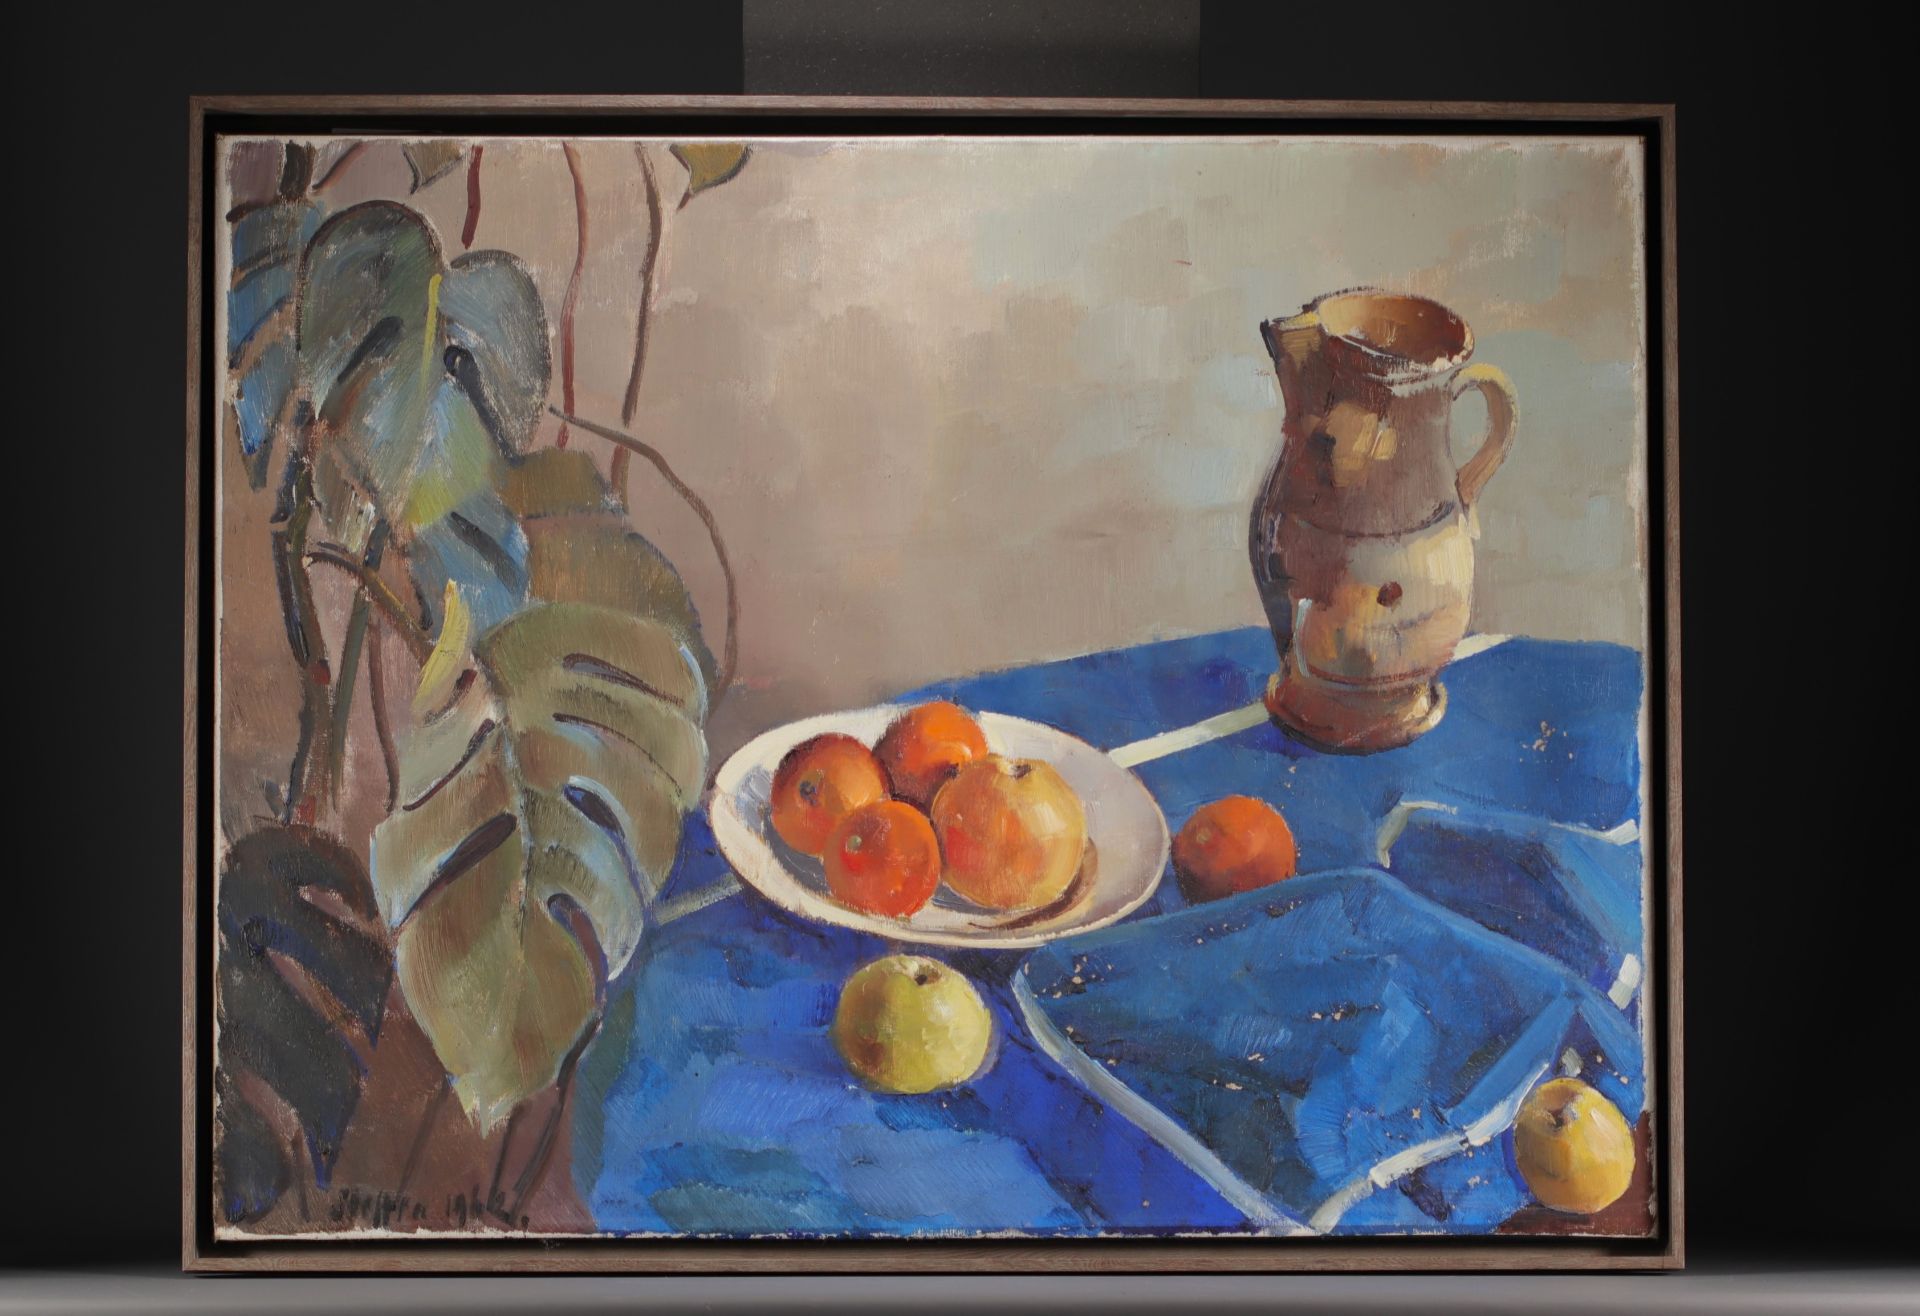 Walter Arnold STEFFEN (1924-1982) "Still life with fruits" Oil on canvas, signed and dated 1962. - Bild 2 aus 2